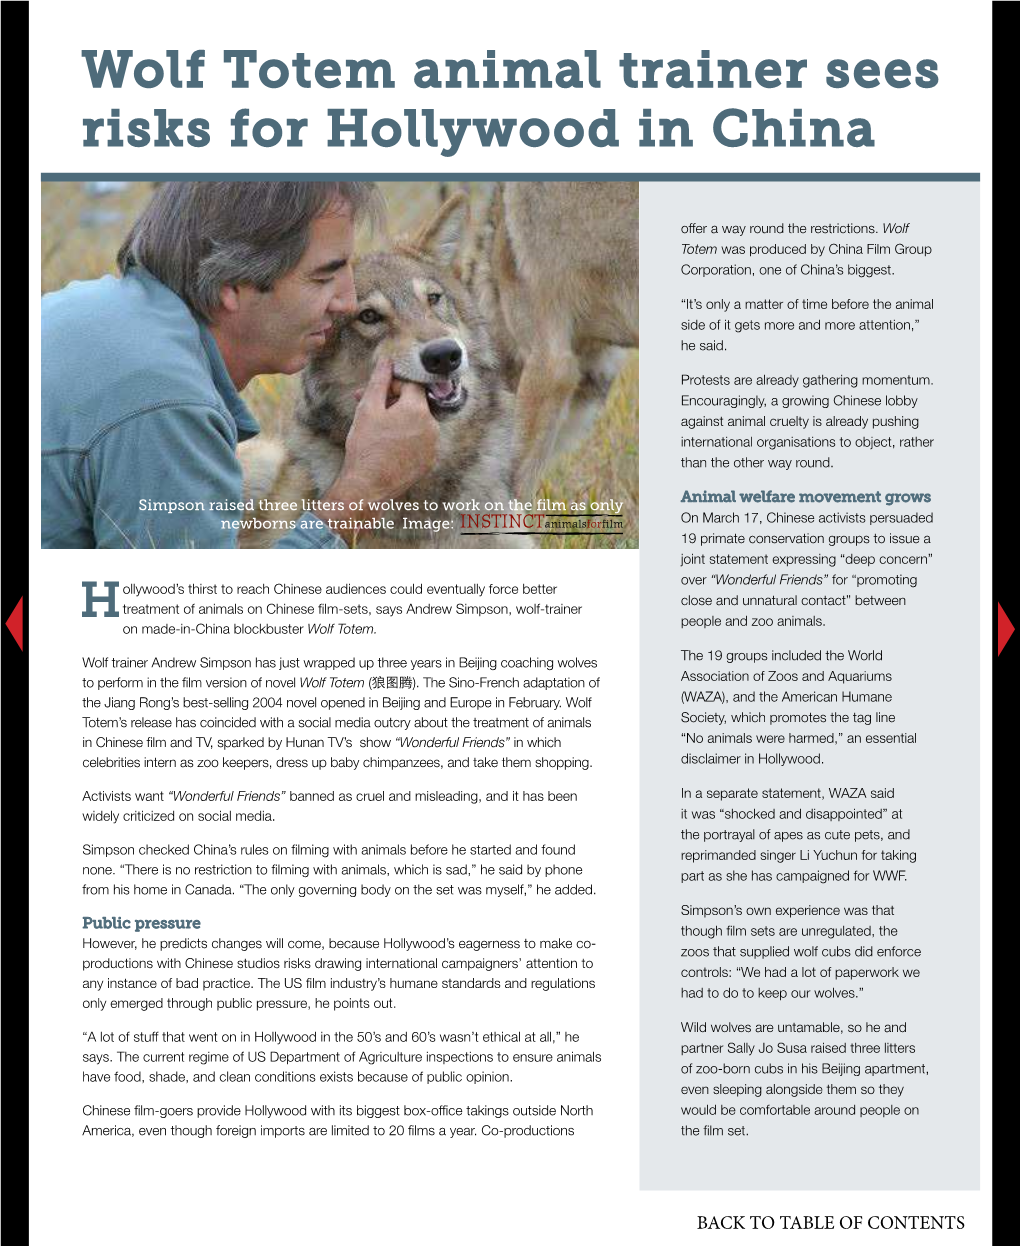 Wolf Totem Animal Trainer Sees Risks for Hollywood in China